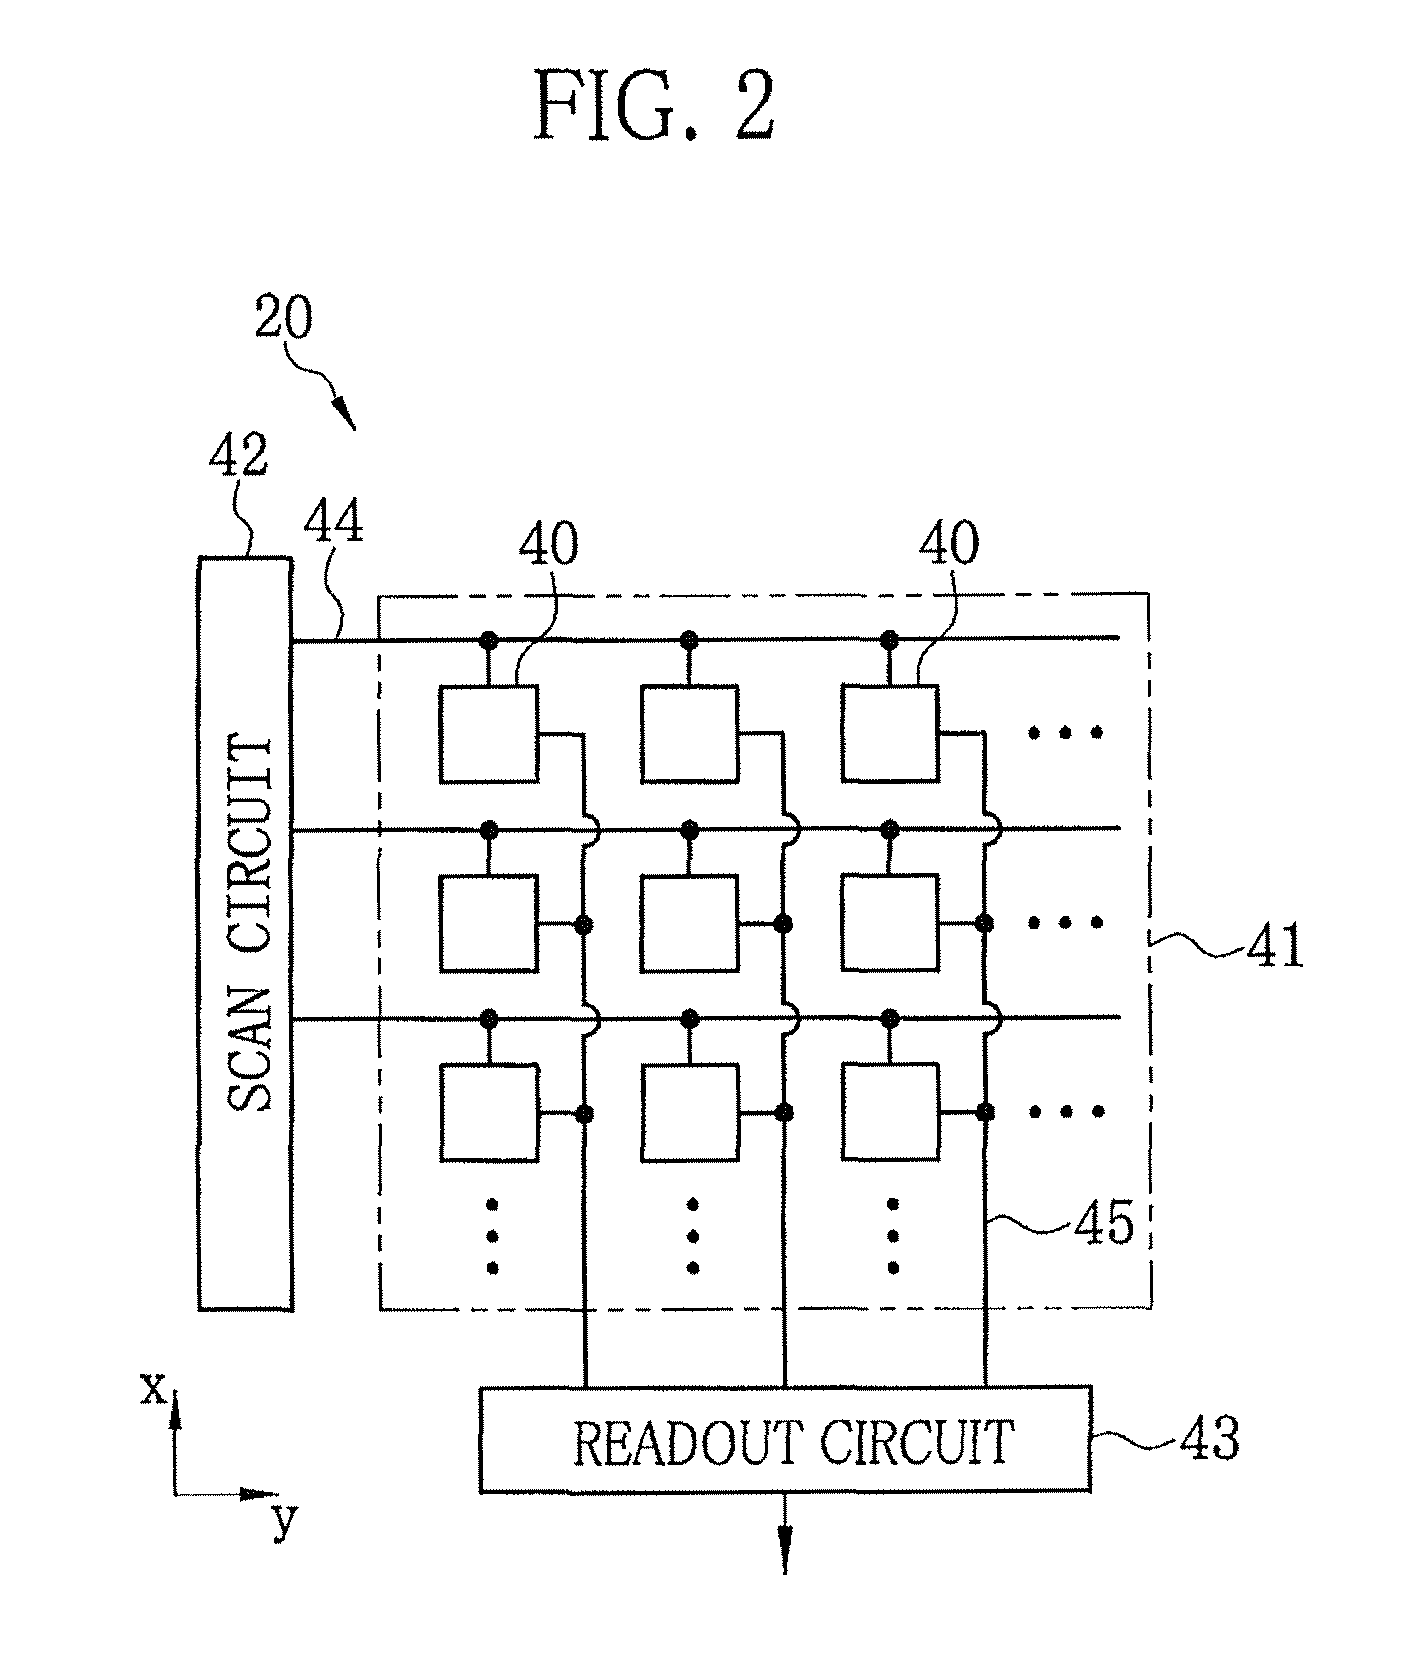 Radiation imaging system and apparatus and method for detecting defective pixel